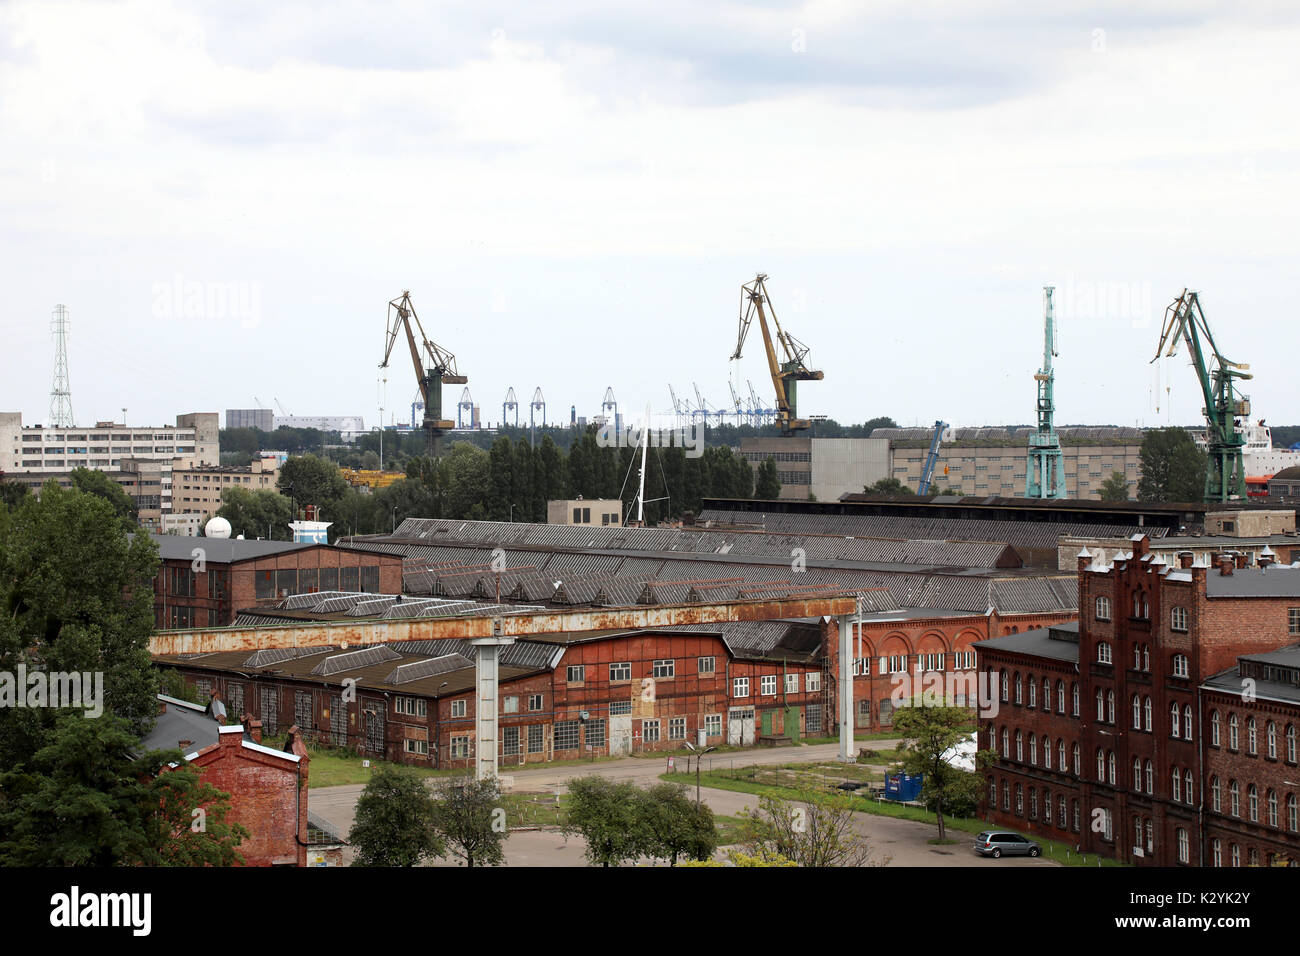 Warehouses and cranes dominate the landscape around the Port of Gdańsk, Poland on 20 August 2017. Stock Photo